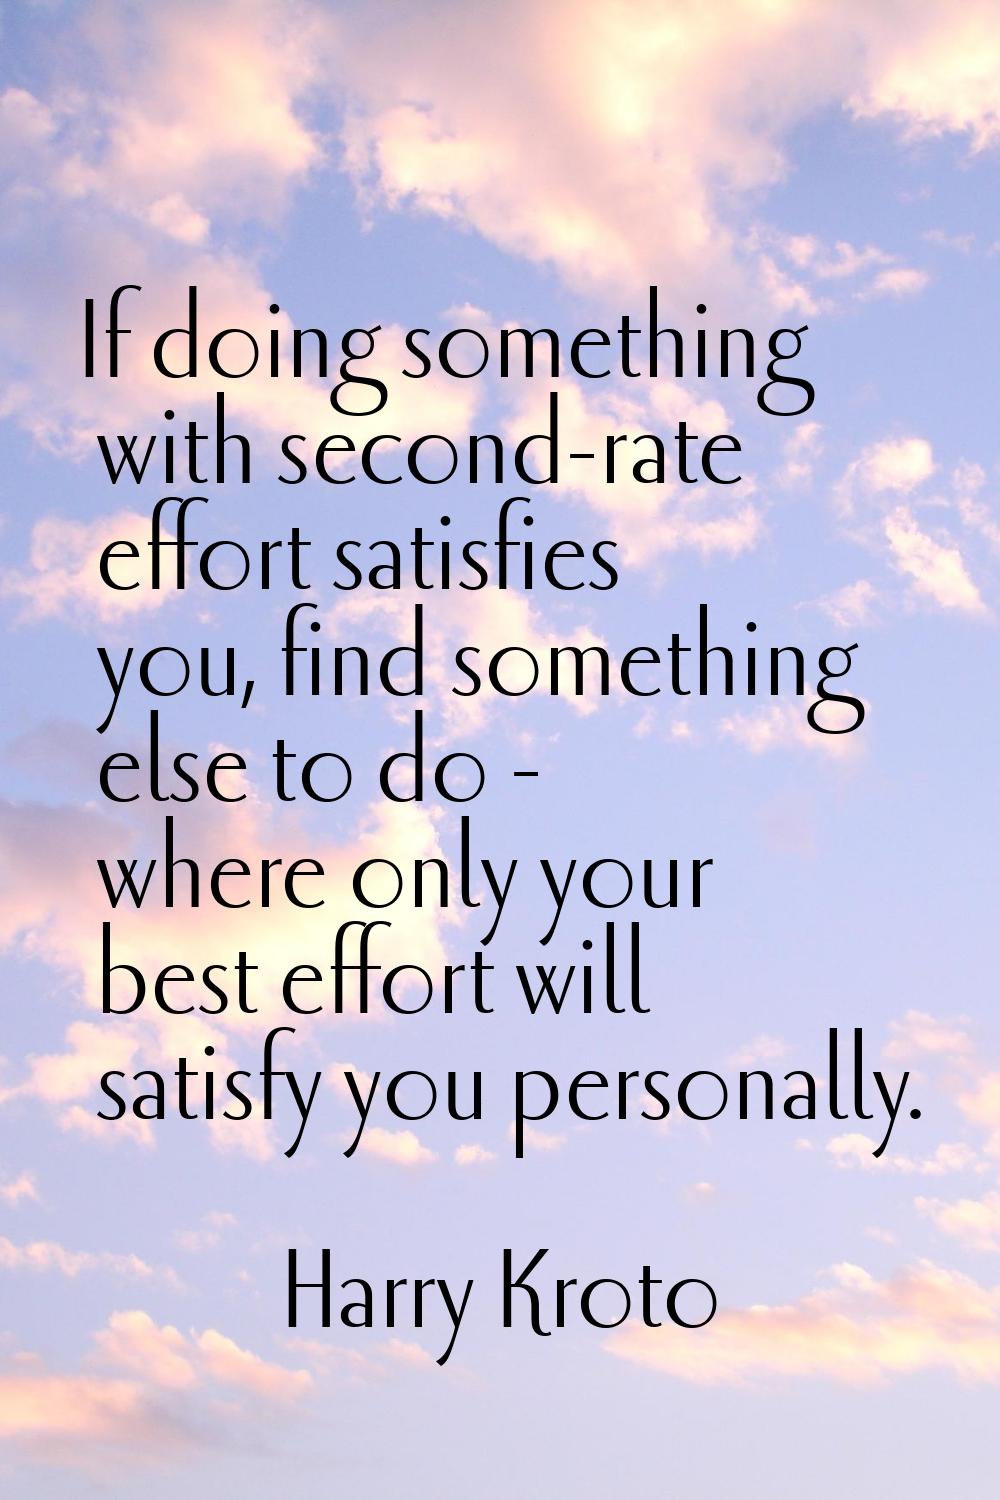 If doing something with second-rate effort satisfies you, find something else to do - where only yo